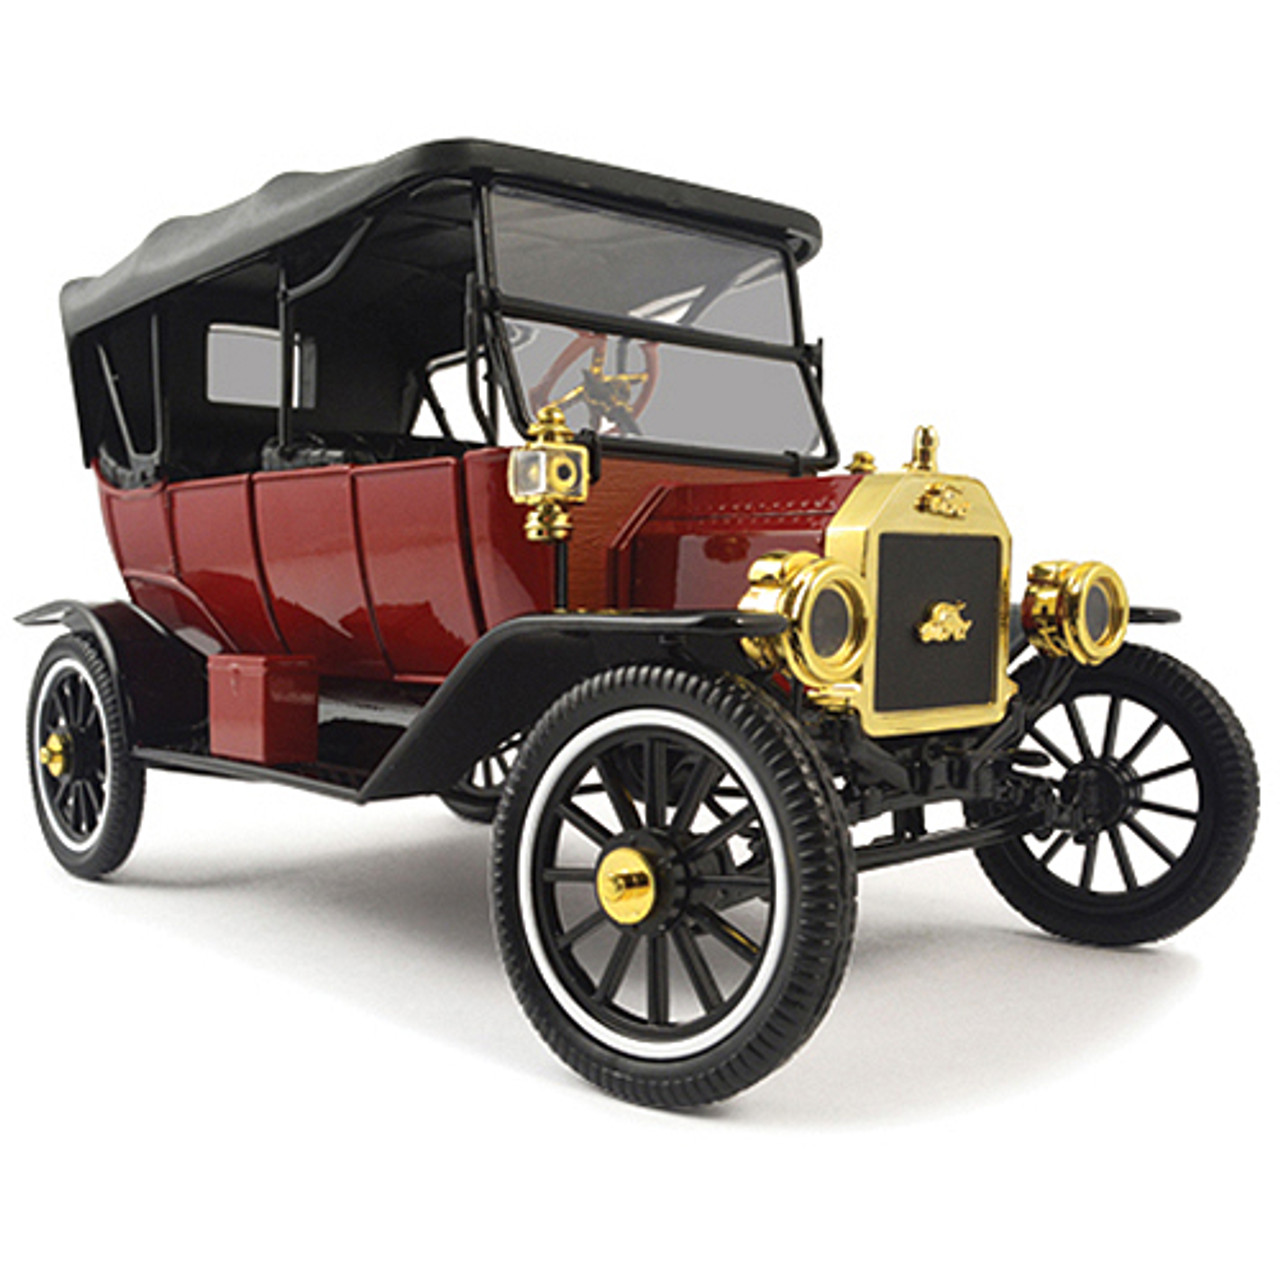 1915 Ford Model T Top Up Touring Car 1:18 Scale Diecast Model by Sunstar